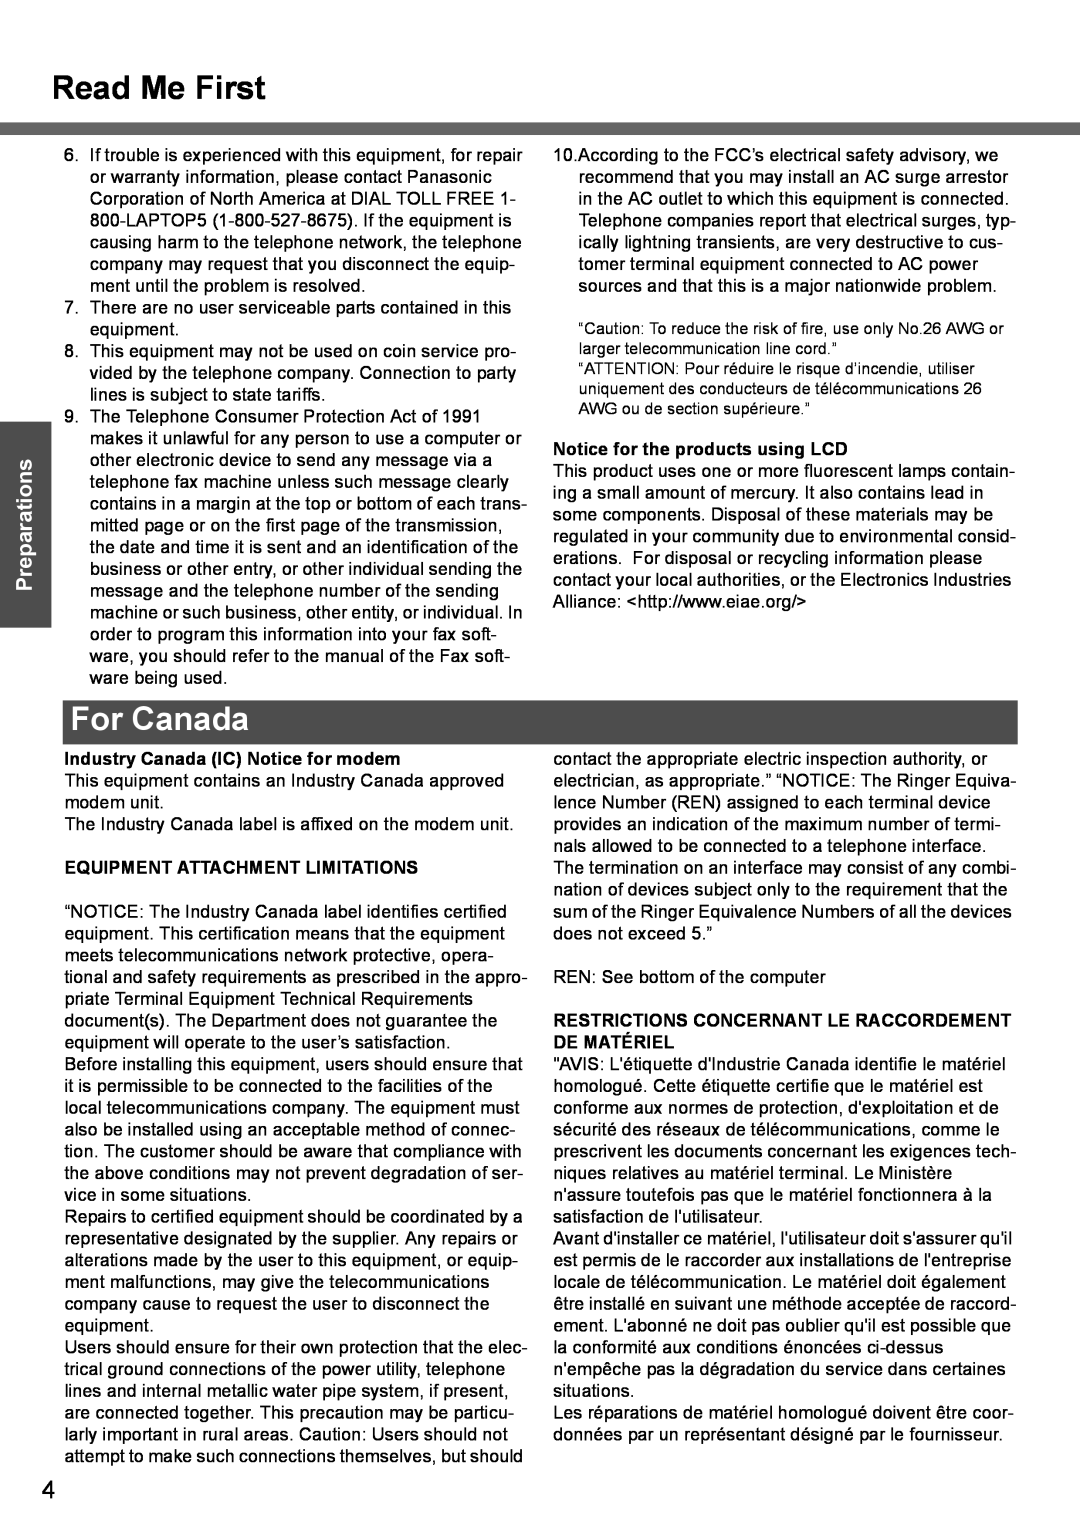 Panasonic CF-T4 operating instructions Read Me First, For Canada, Preparations 